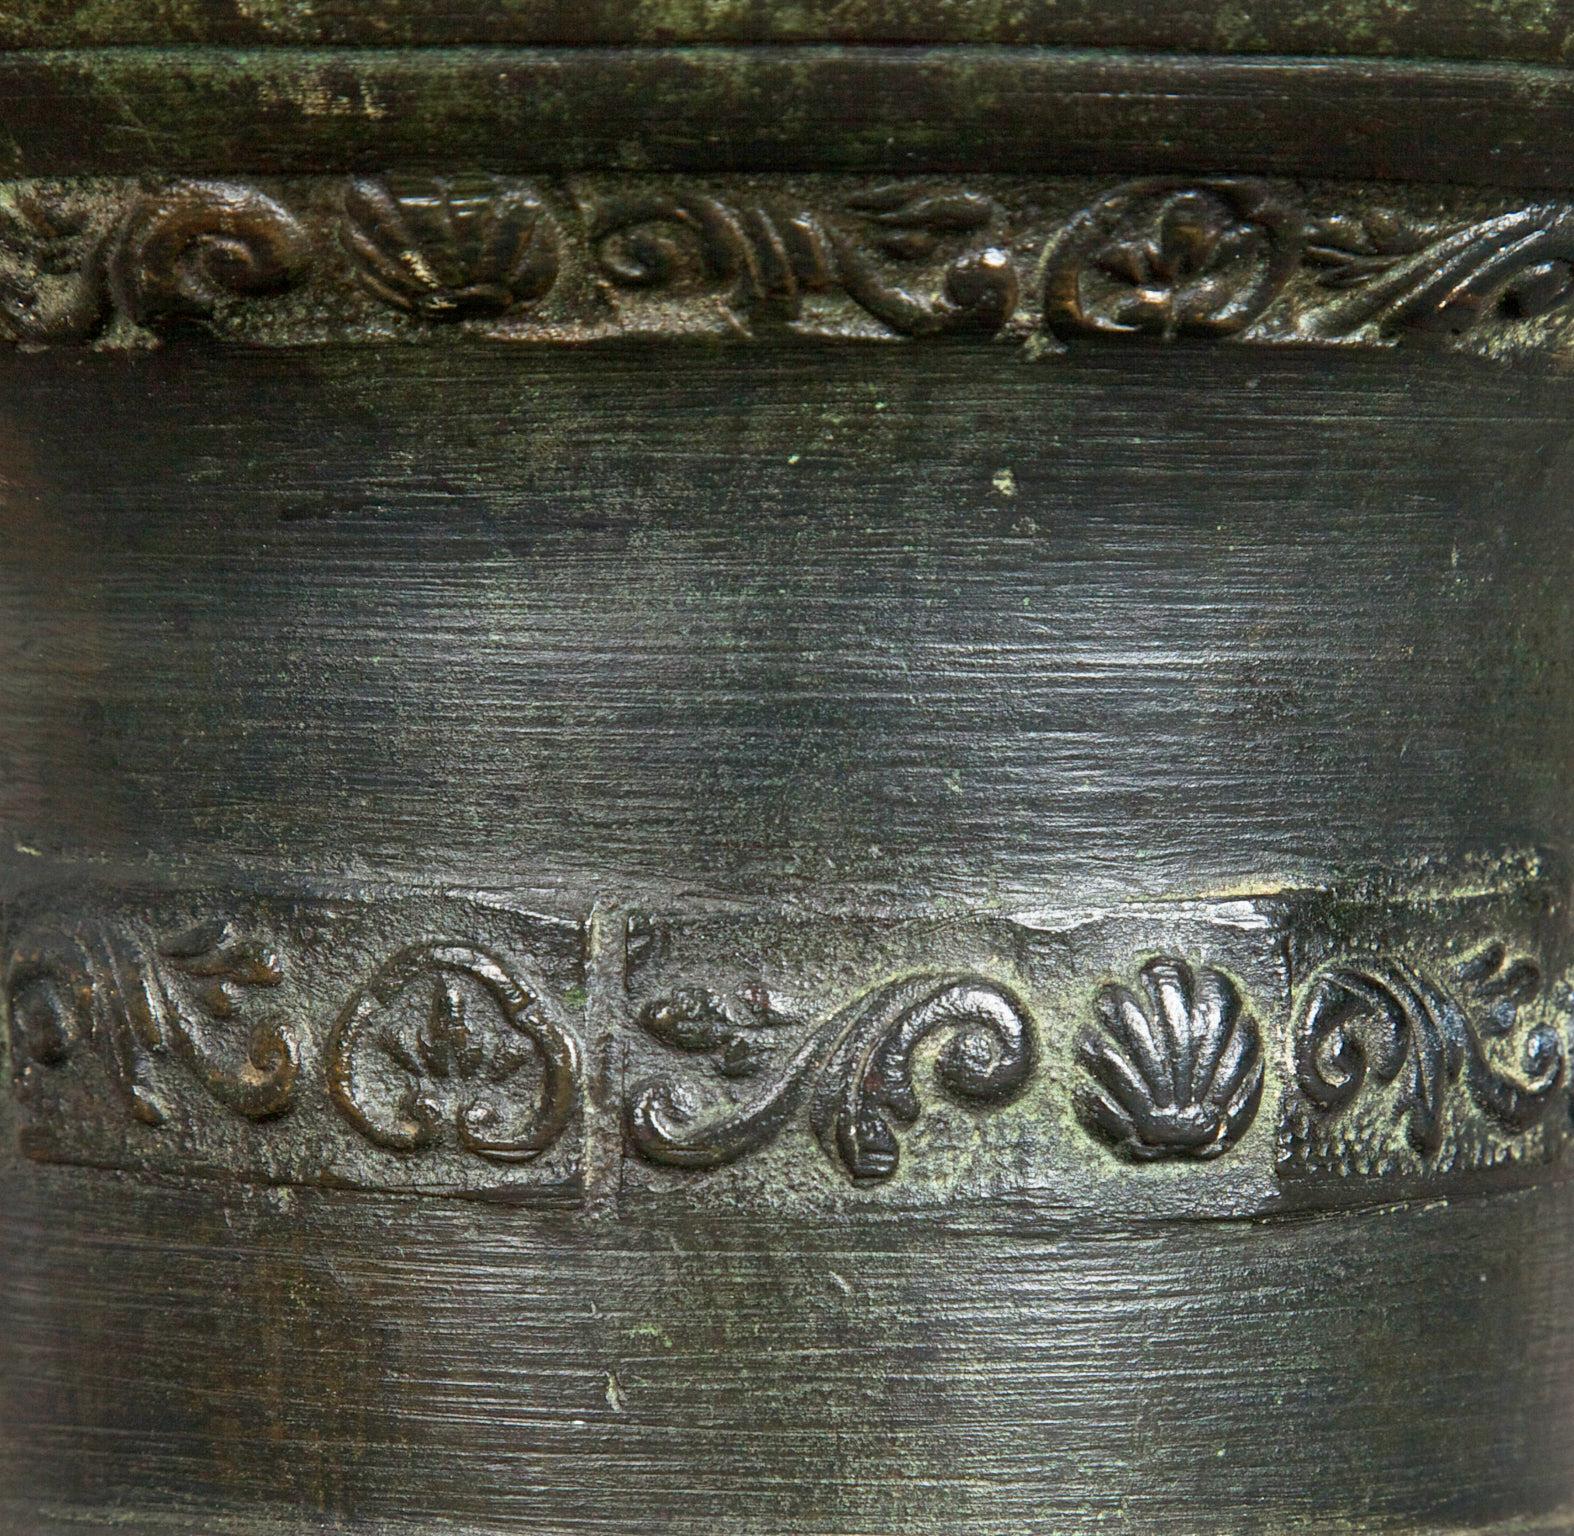 Mid-17th century lead bronze mortar. English, Whitechapel, London, circa 1630-1650

The deep rimmed mortar cast with a scrolling floral pattern under the lip, the body with further band of interlace centered upon scallop shells. From a presently